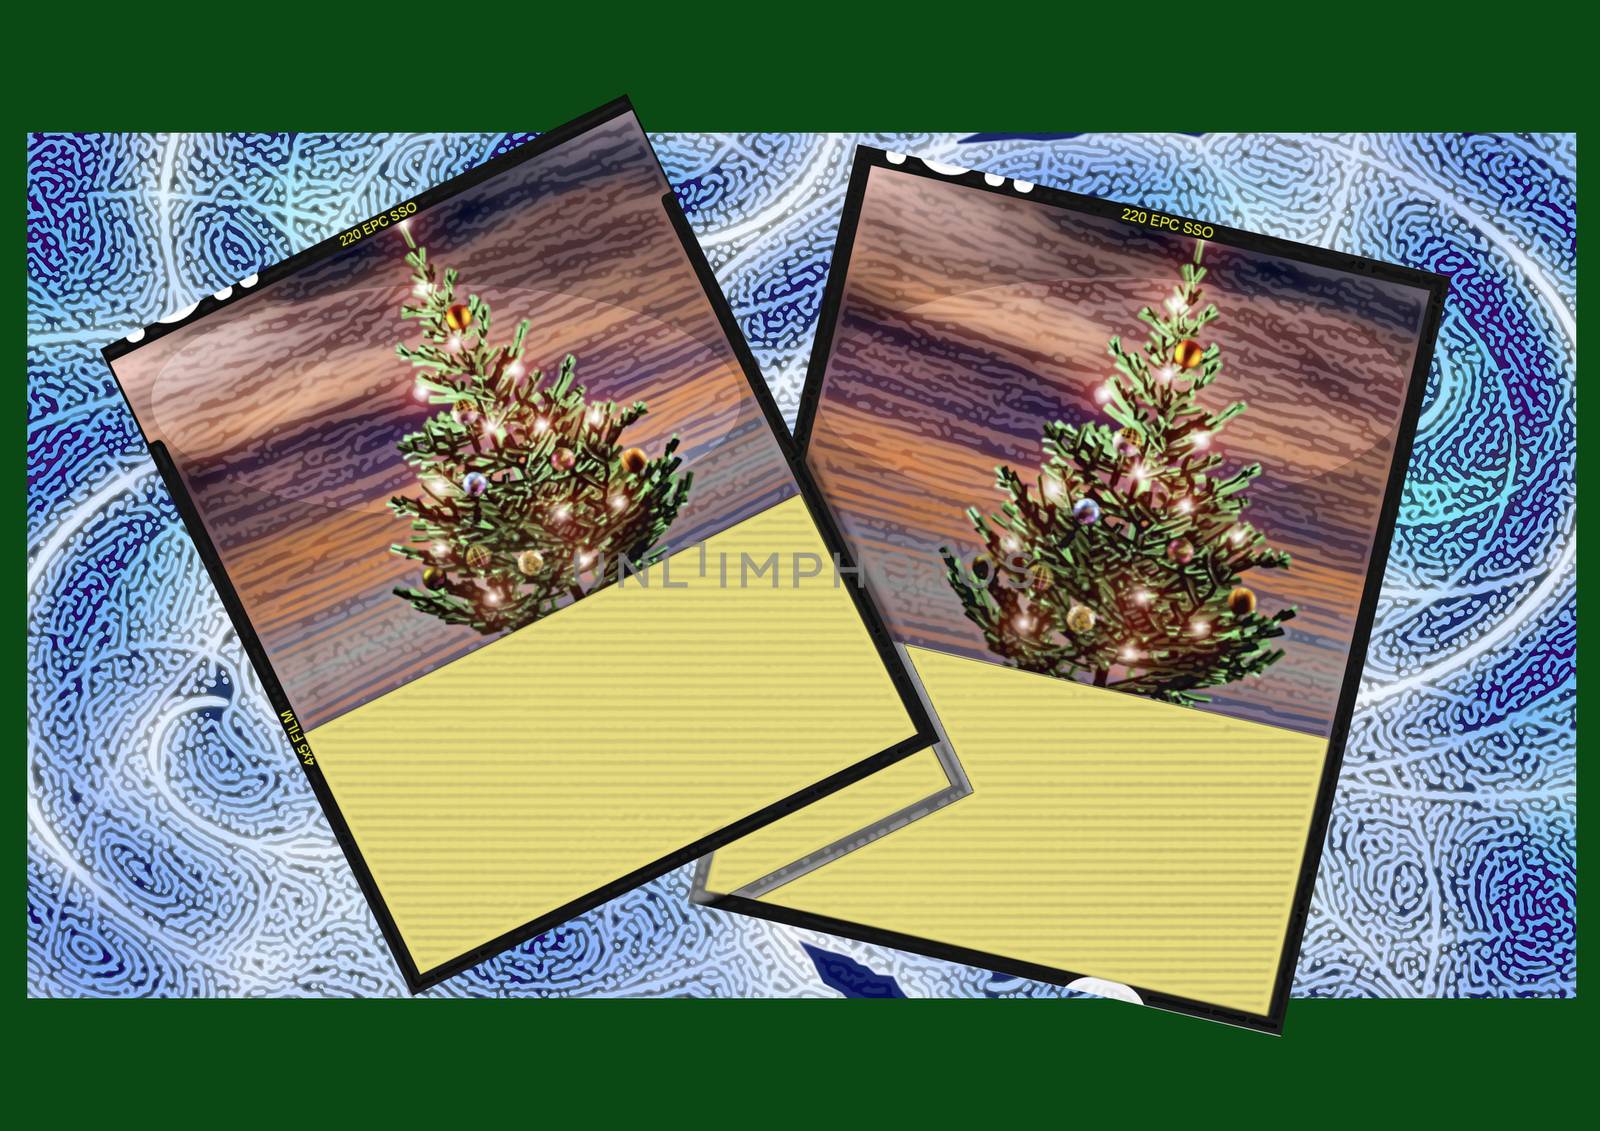 Two greeting cards, these are stylized photo shots, part of the design for the New Year project